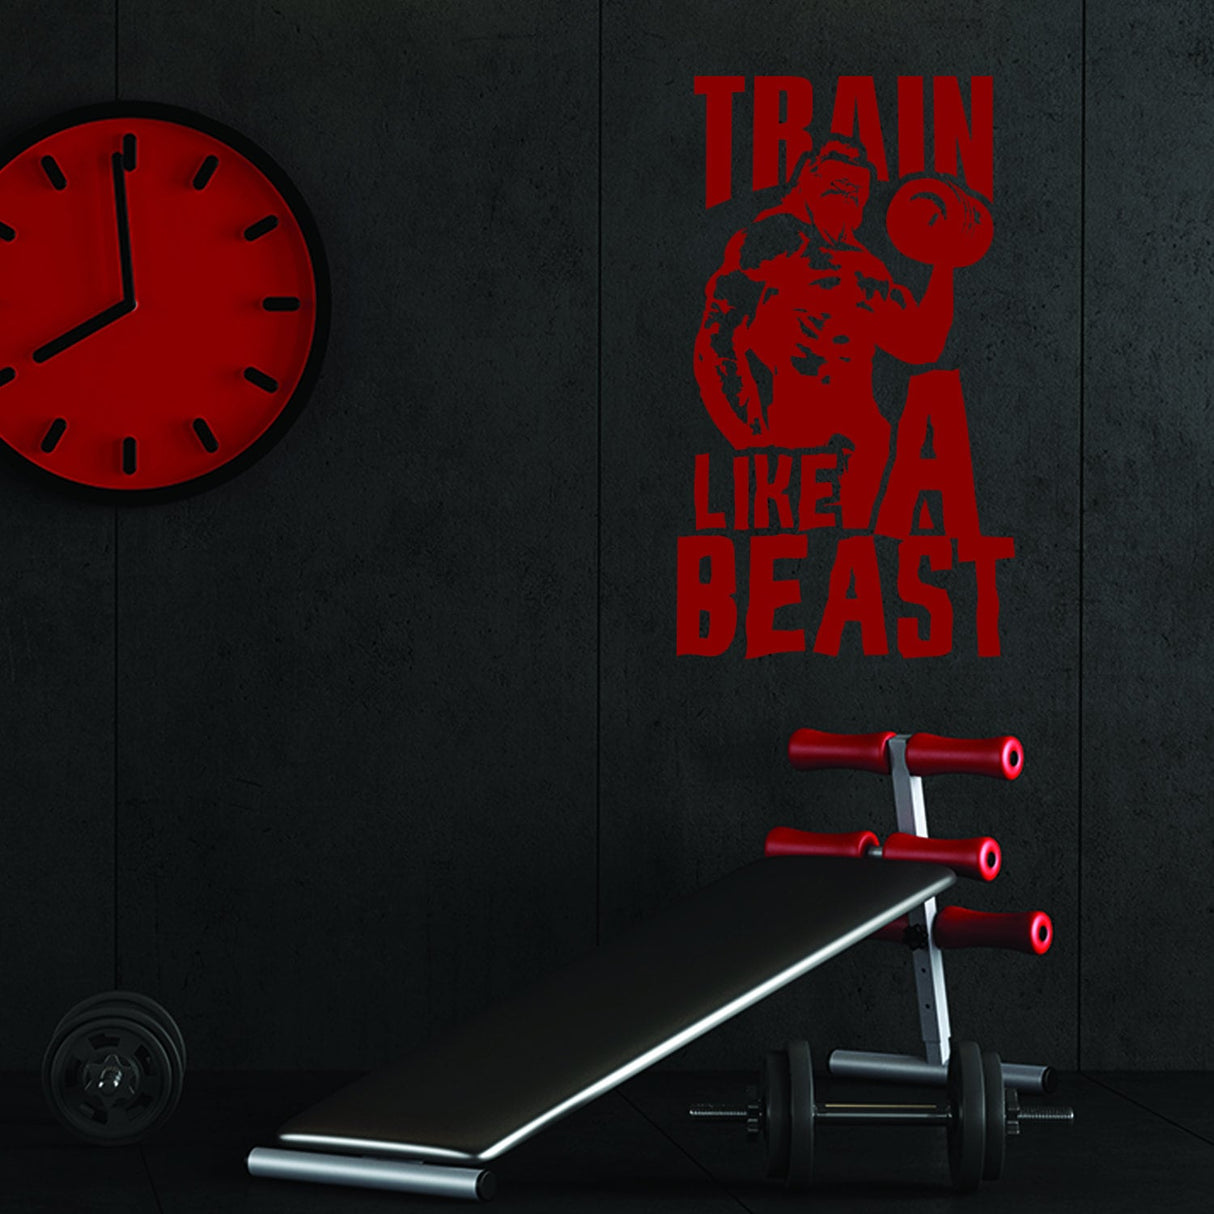 Fitness Gym Wall Workout Decor Vinyl Decal - Inspirational Motivational Sports Stickers Quotes For Exercise Room Beast Mode Sticker Decals